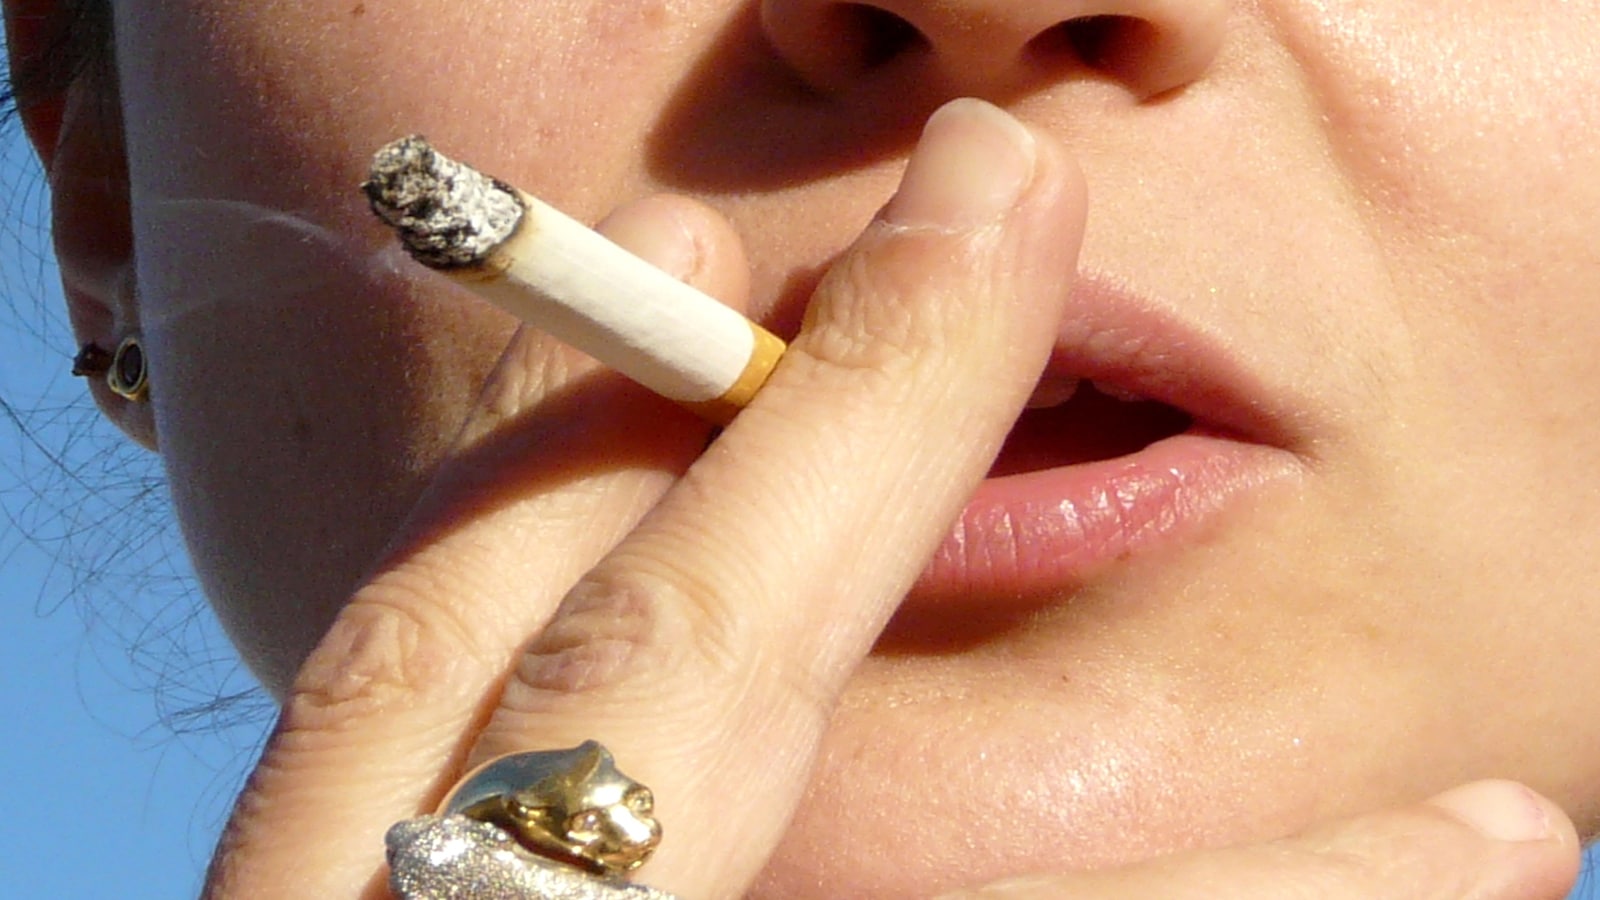 Researchers Reveal Breakthrough Way To Naturally Decrease Cigarette Cravings